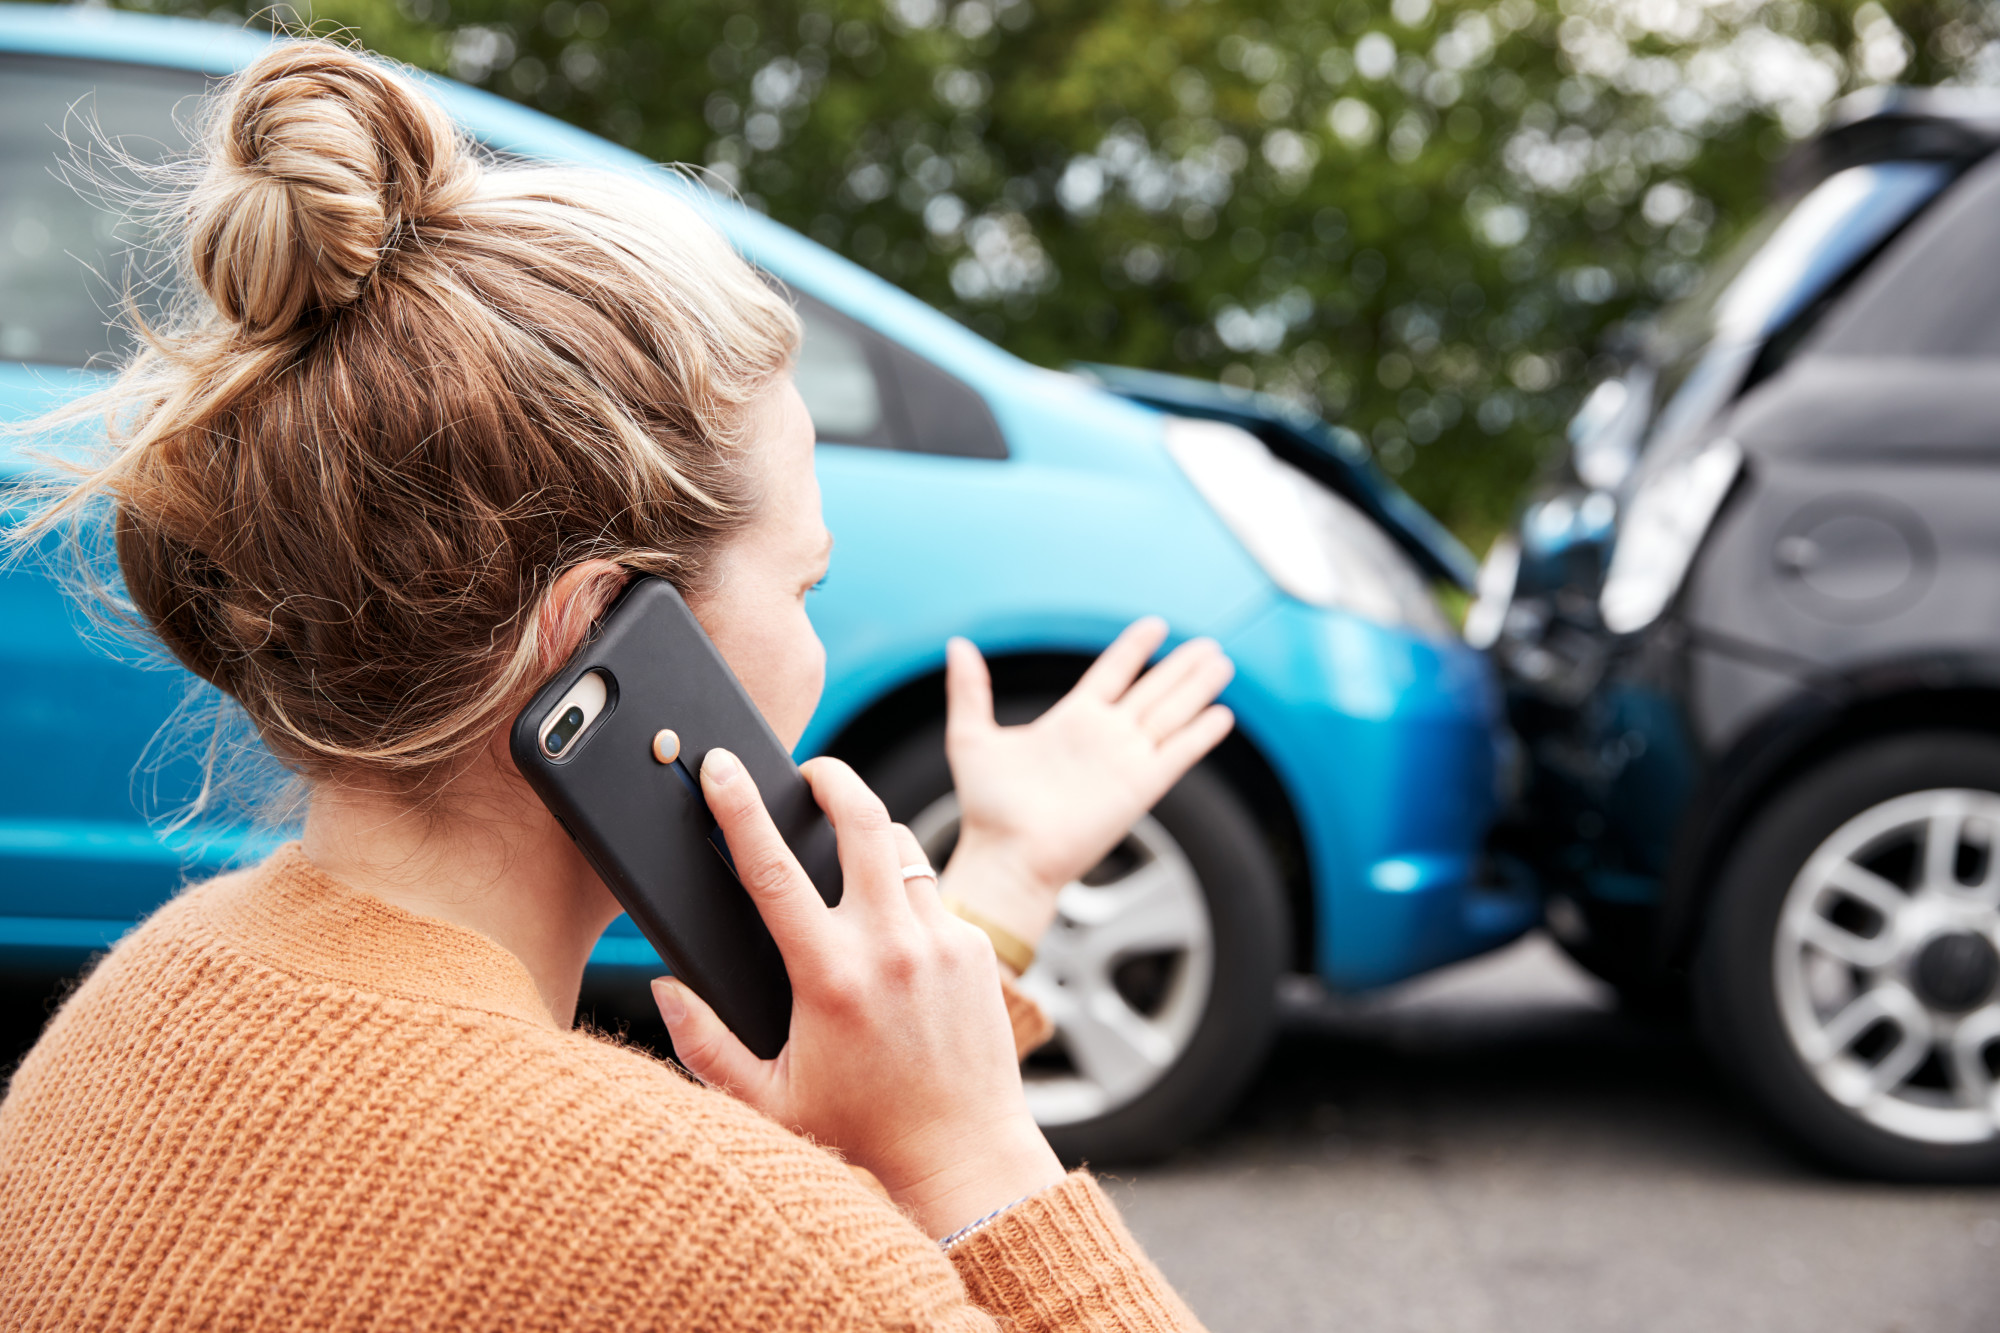 car accident with woman on phone